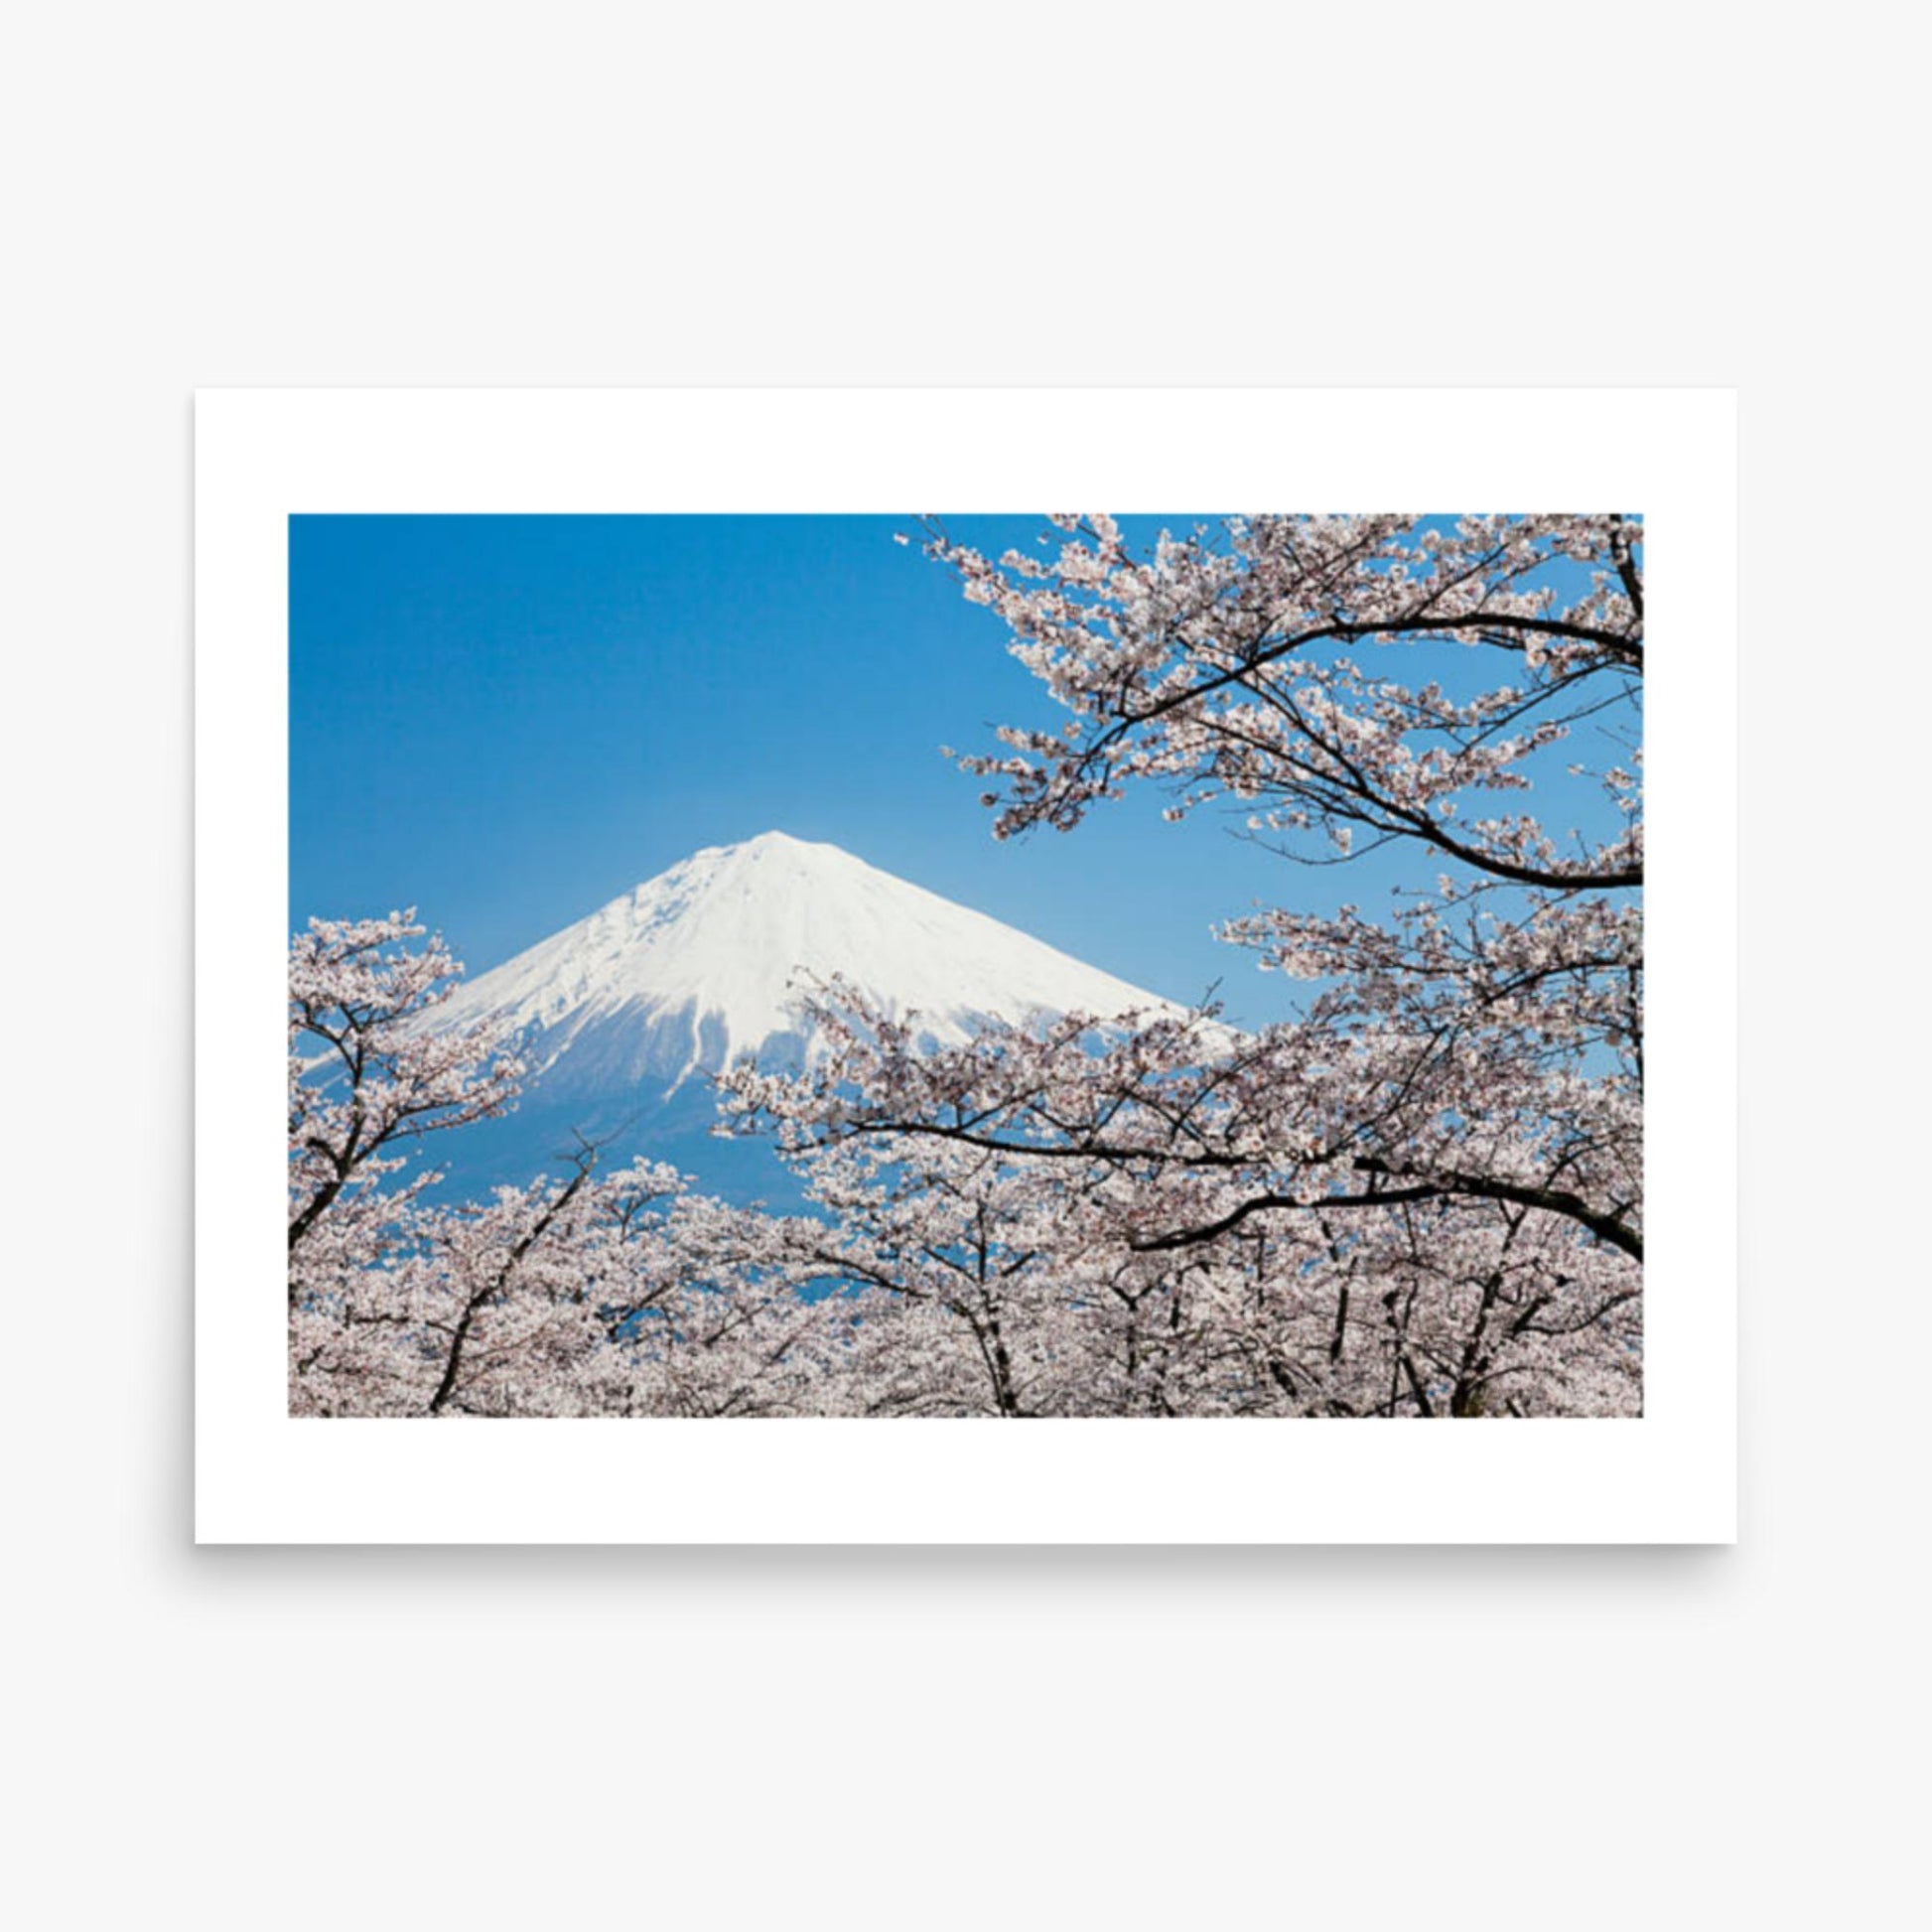 Mount Fuji & Cherry Blossoms 18x24 in Poster